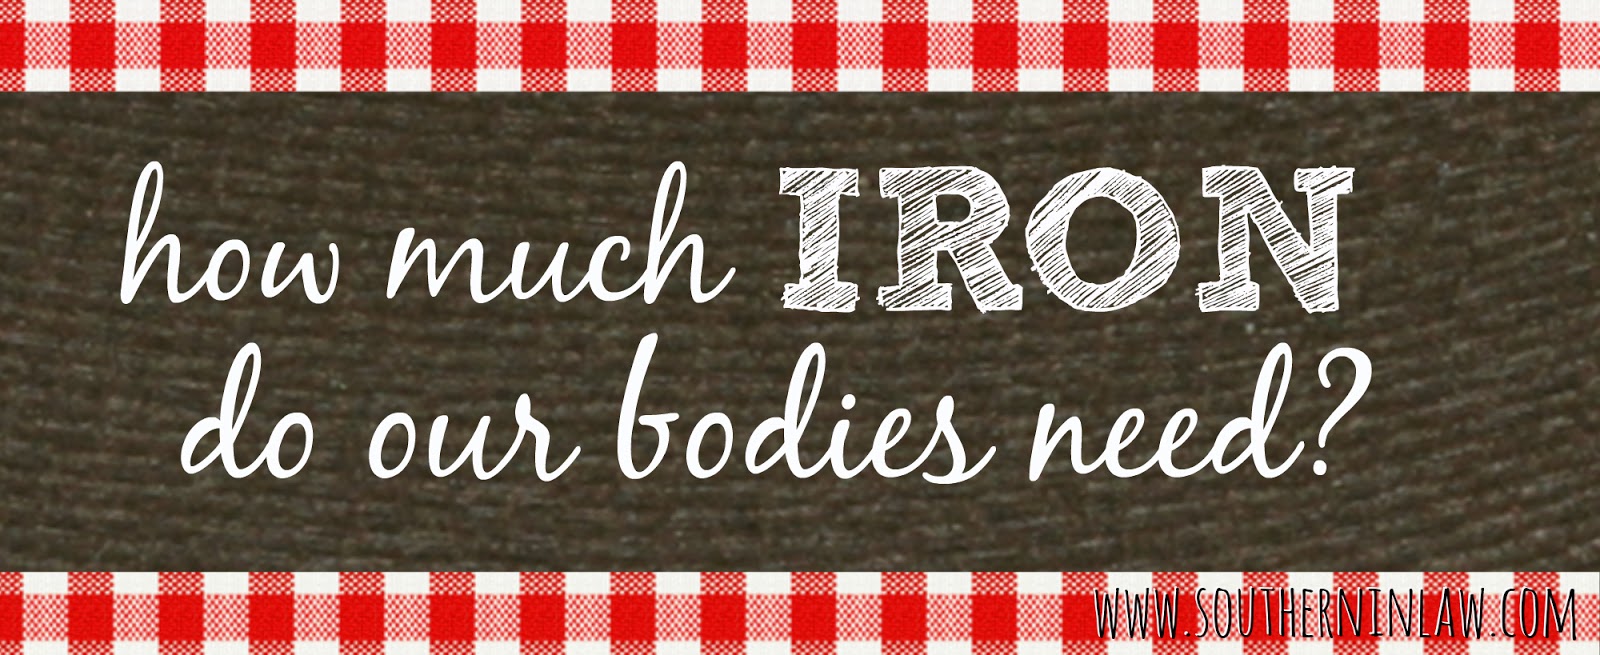 How much iron do our bodies need? 